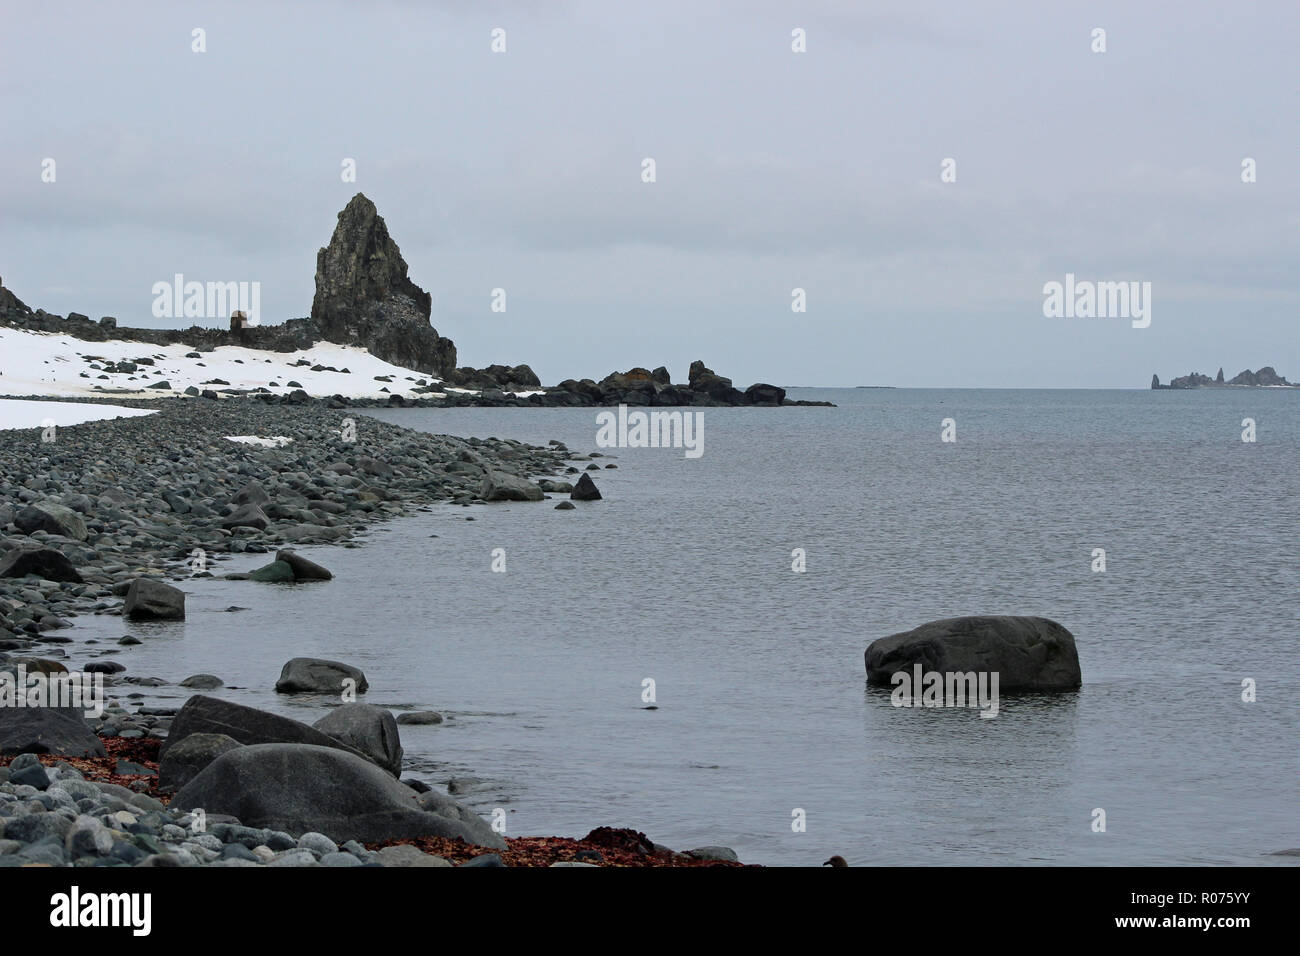 An isolated rocky beach in the South Shetland Islands, Antarctic Peninsula with snow on the ground Stock Photo